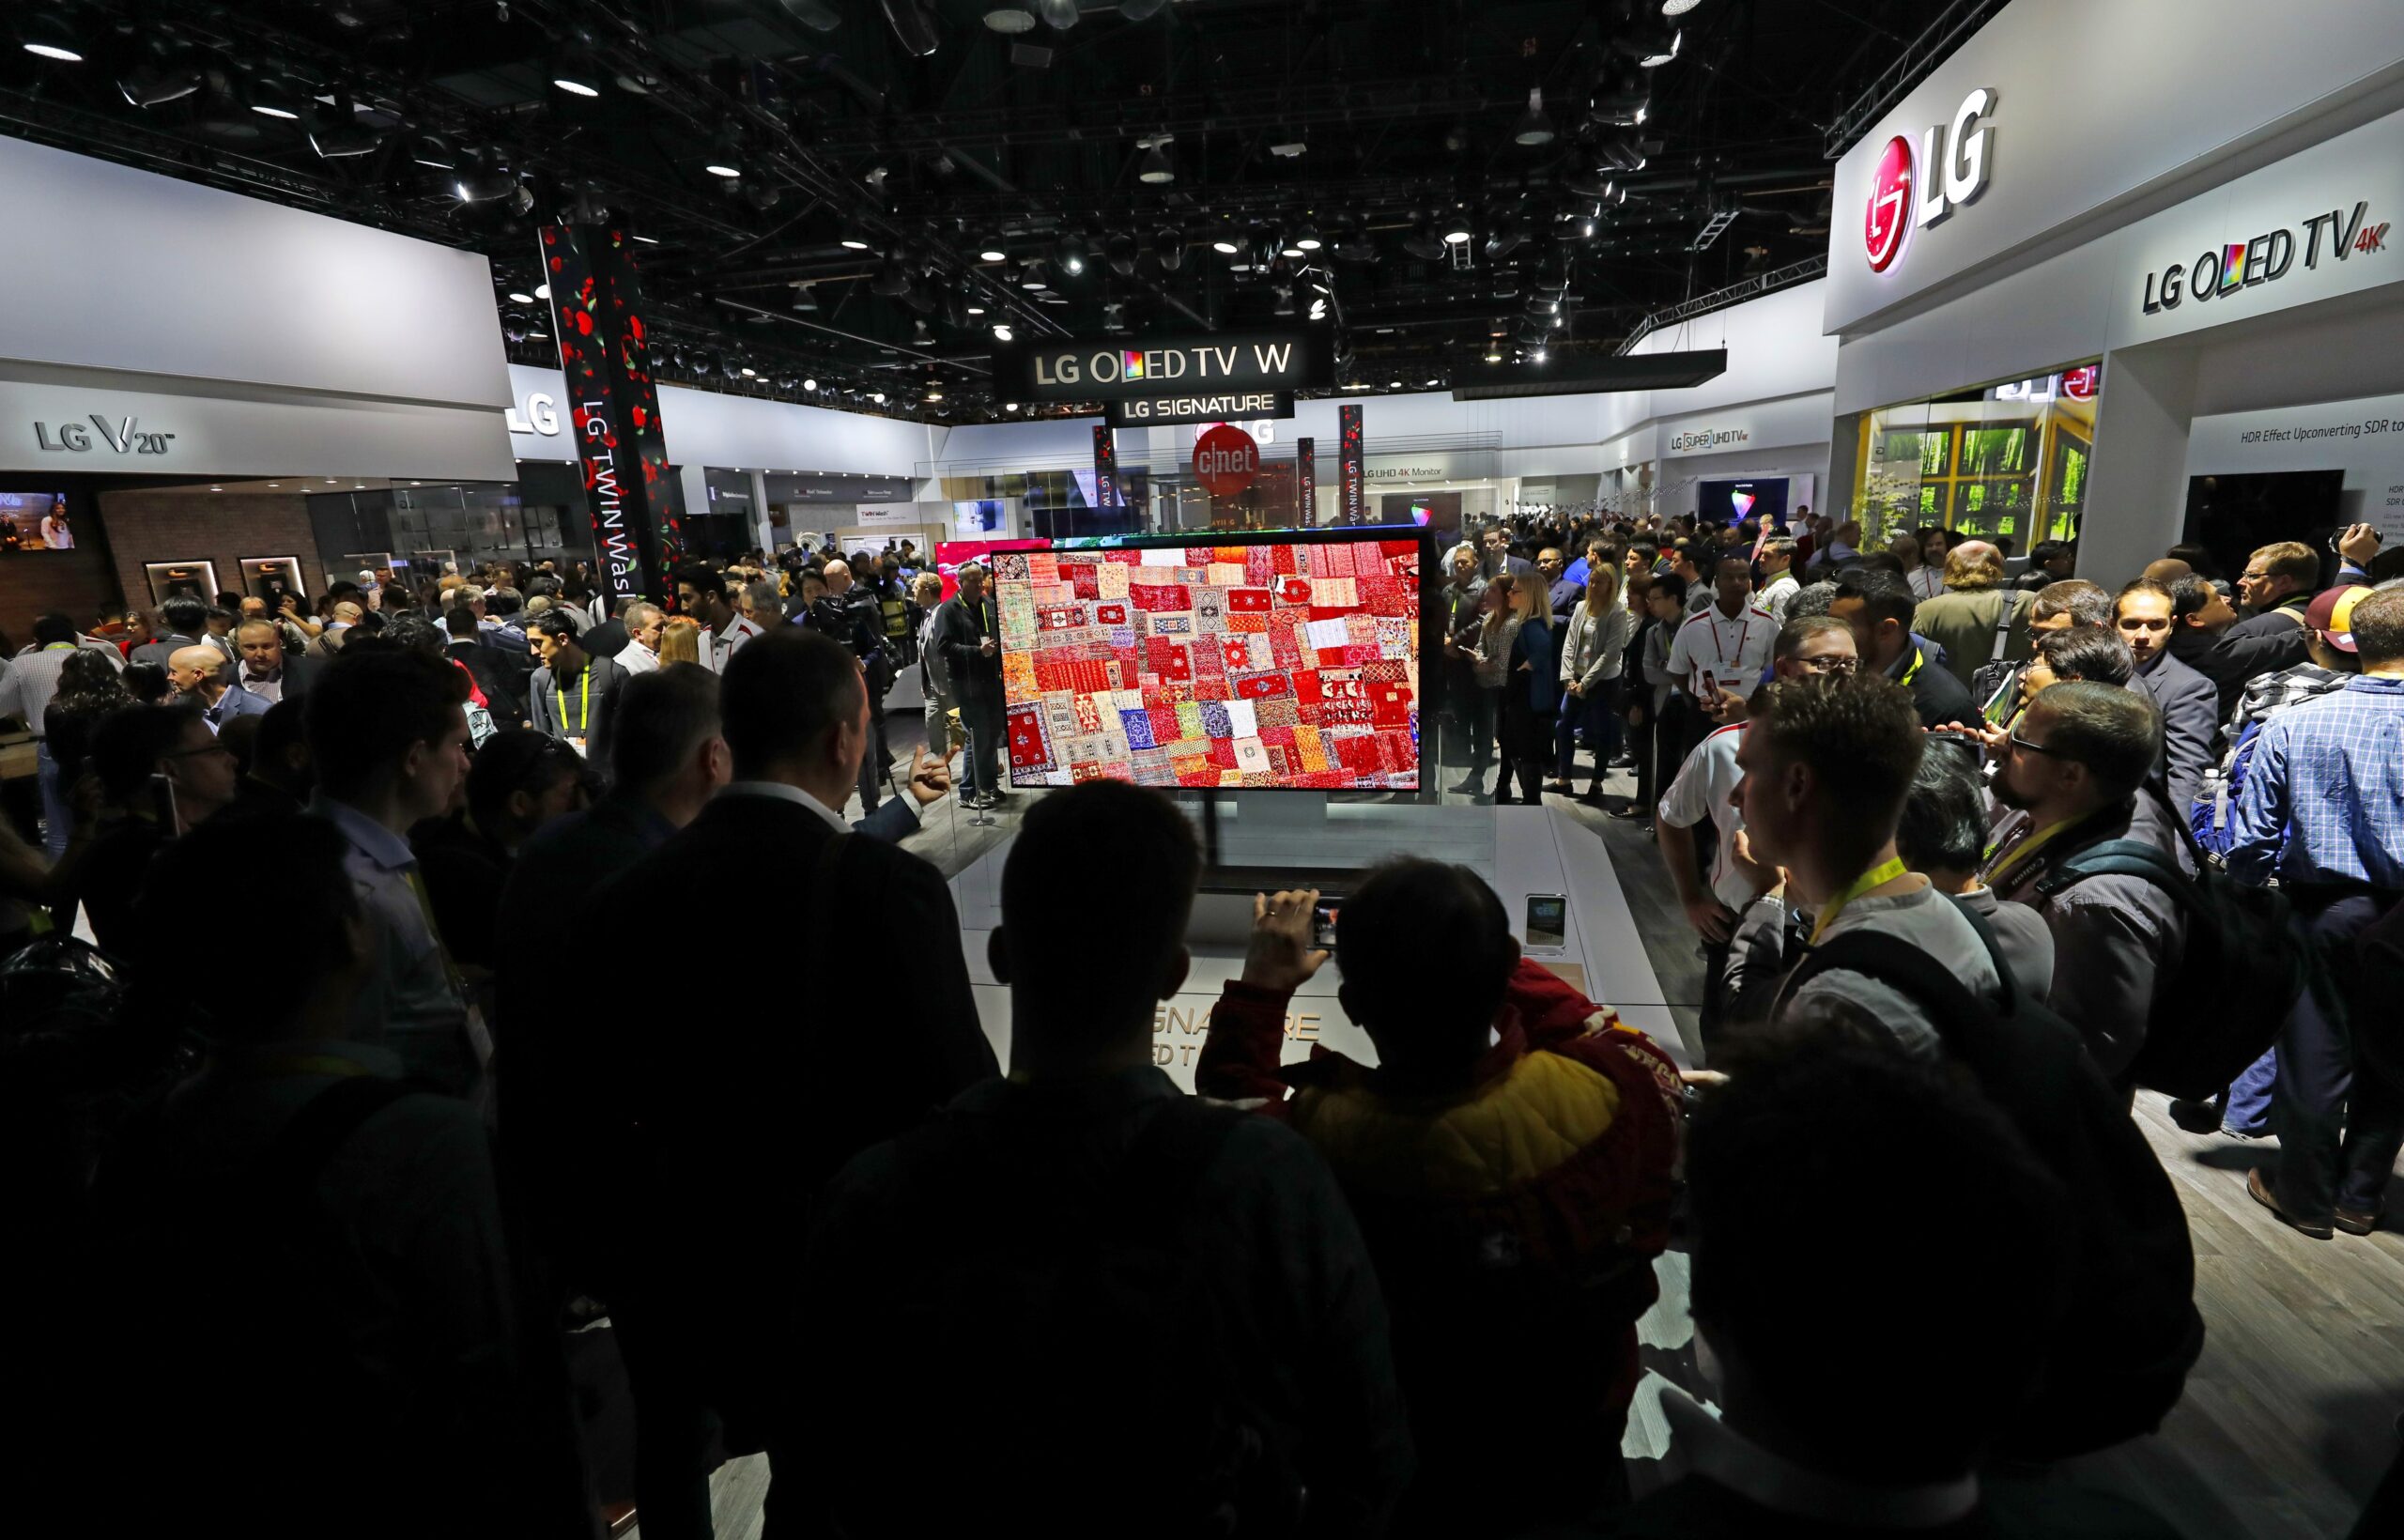 A drove of attendees and reporters at CES 2017 look at the screen of the LG SIGNATURE OLED TV W at LG's booth.